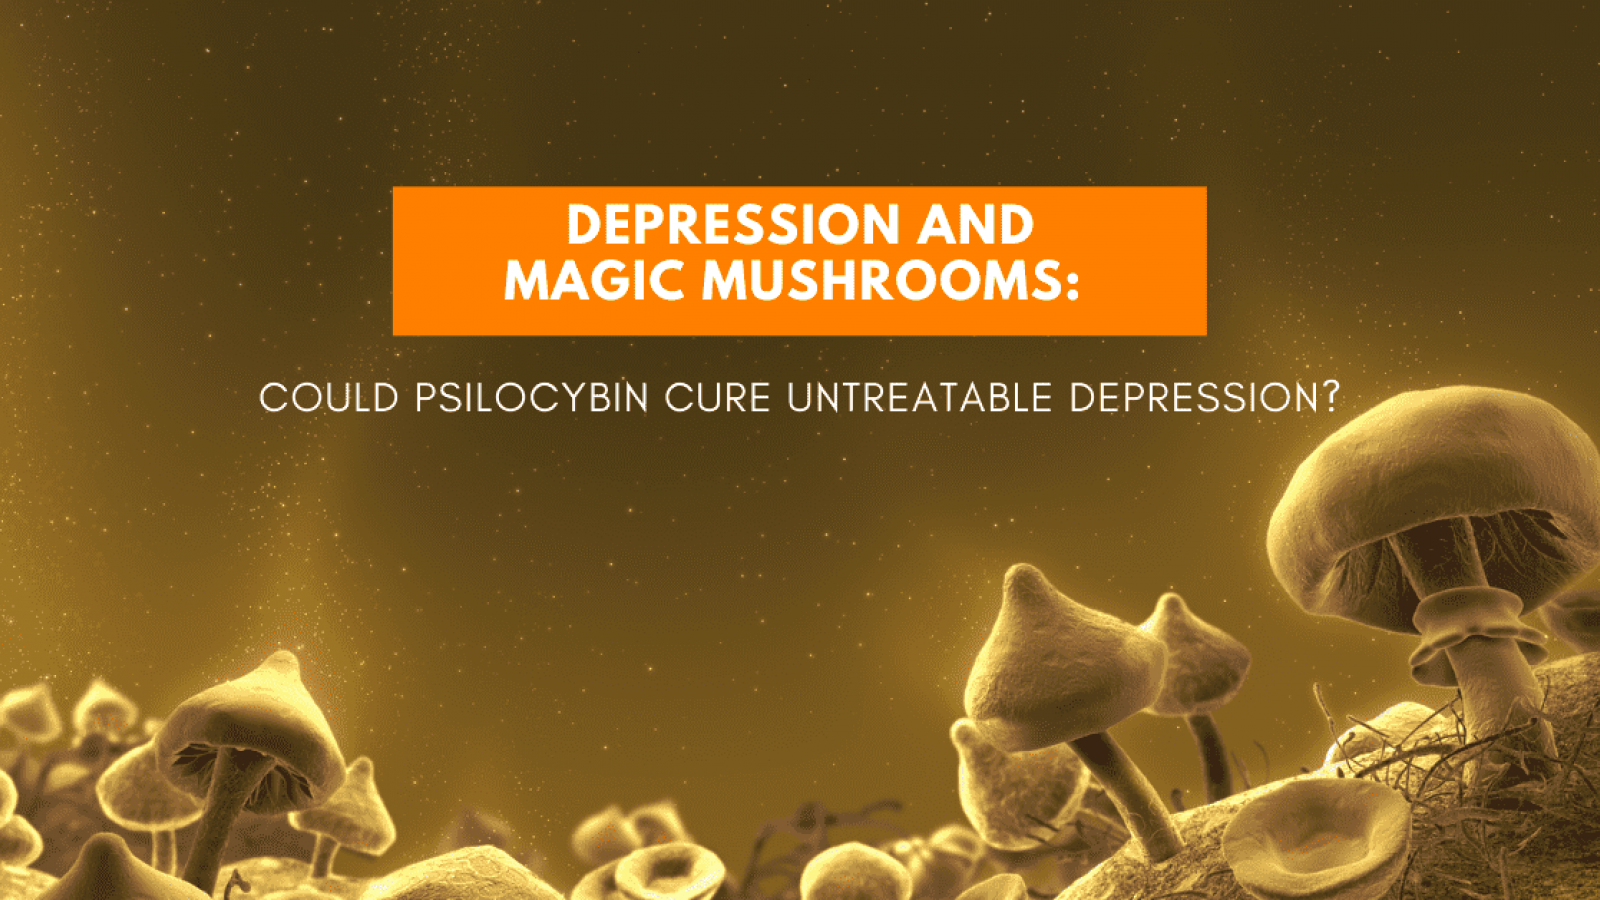 Depression and magic mushrooms: could synthetic psilocybin cure untreatable depression? :: Understanding Animal Research